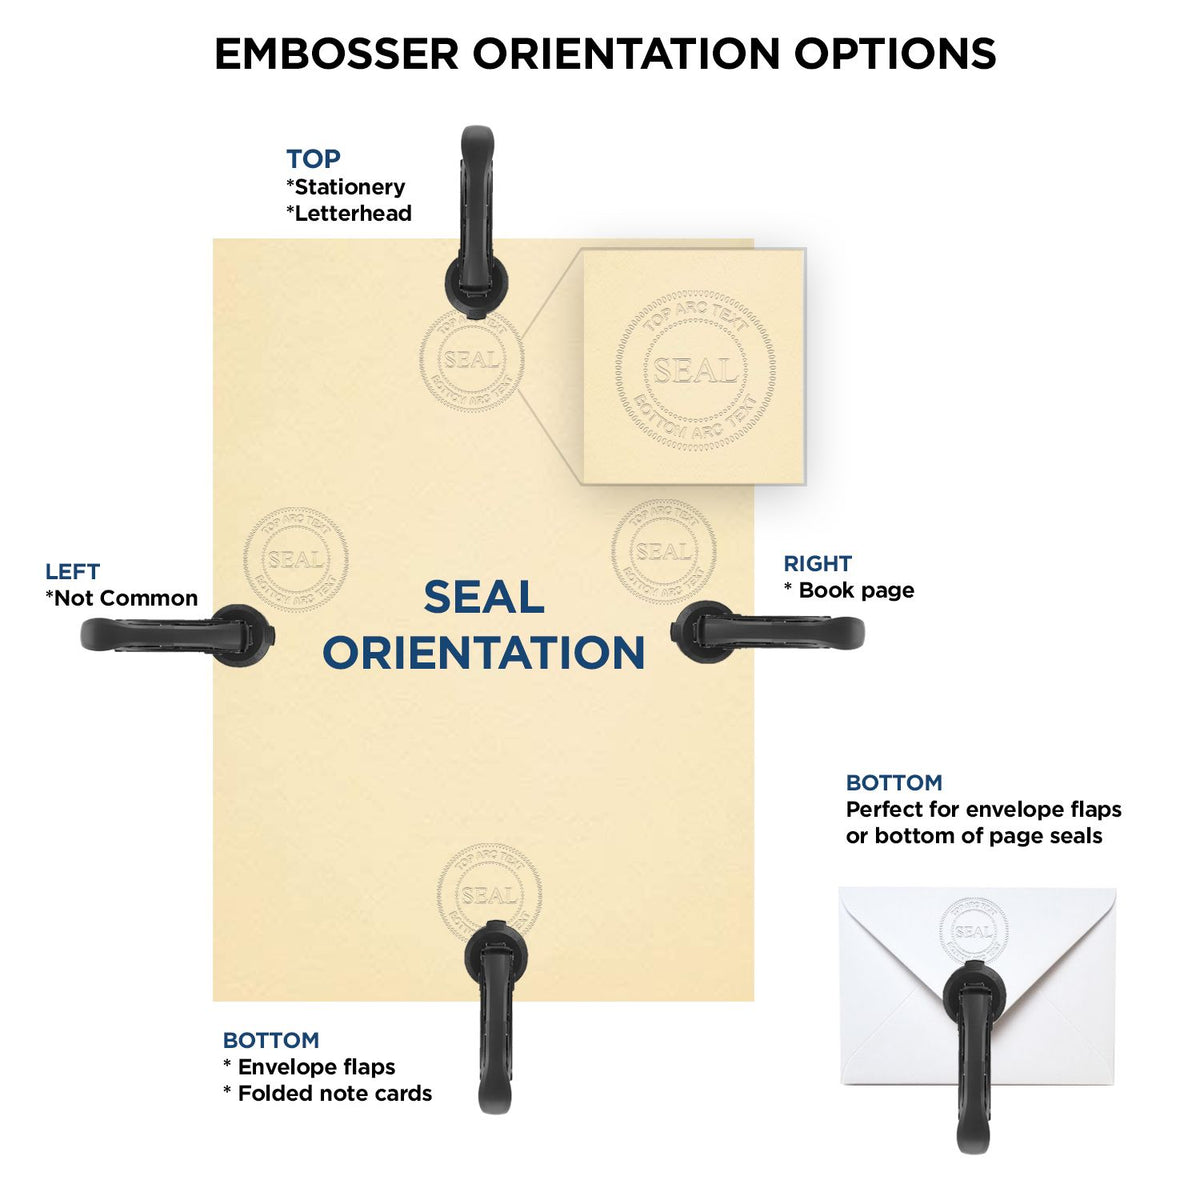 An infographic for the State of Montana Extended Long Reach Engineer Seal showing embosser orientation, this is showing examples of a top, bottom, right and left insert.